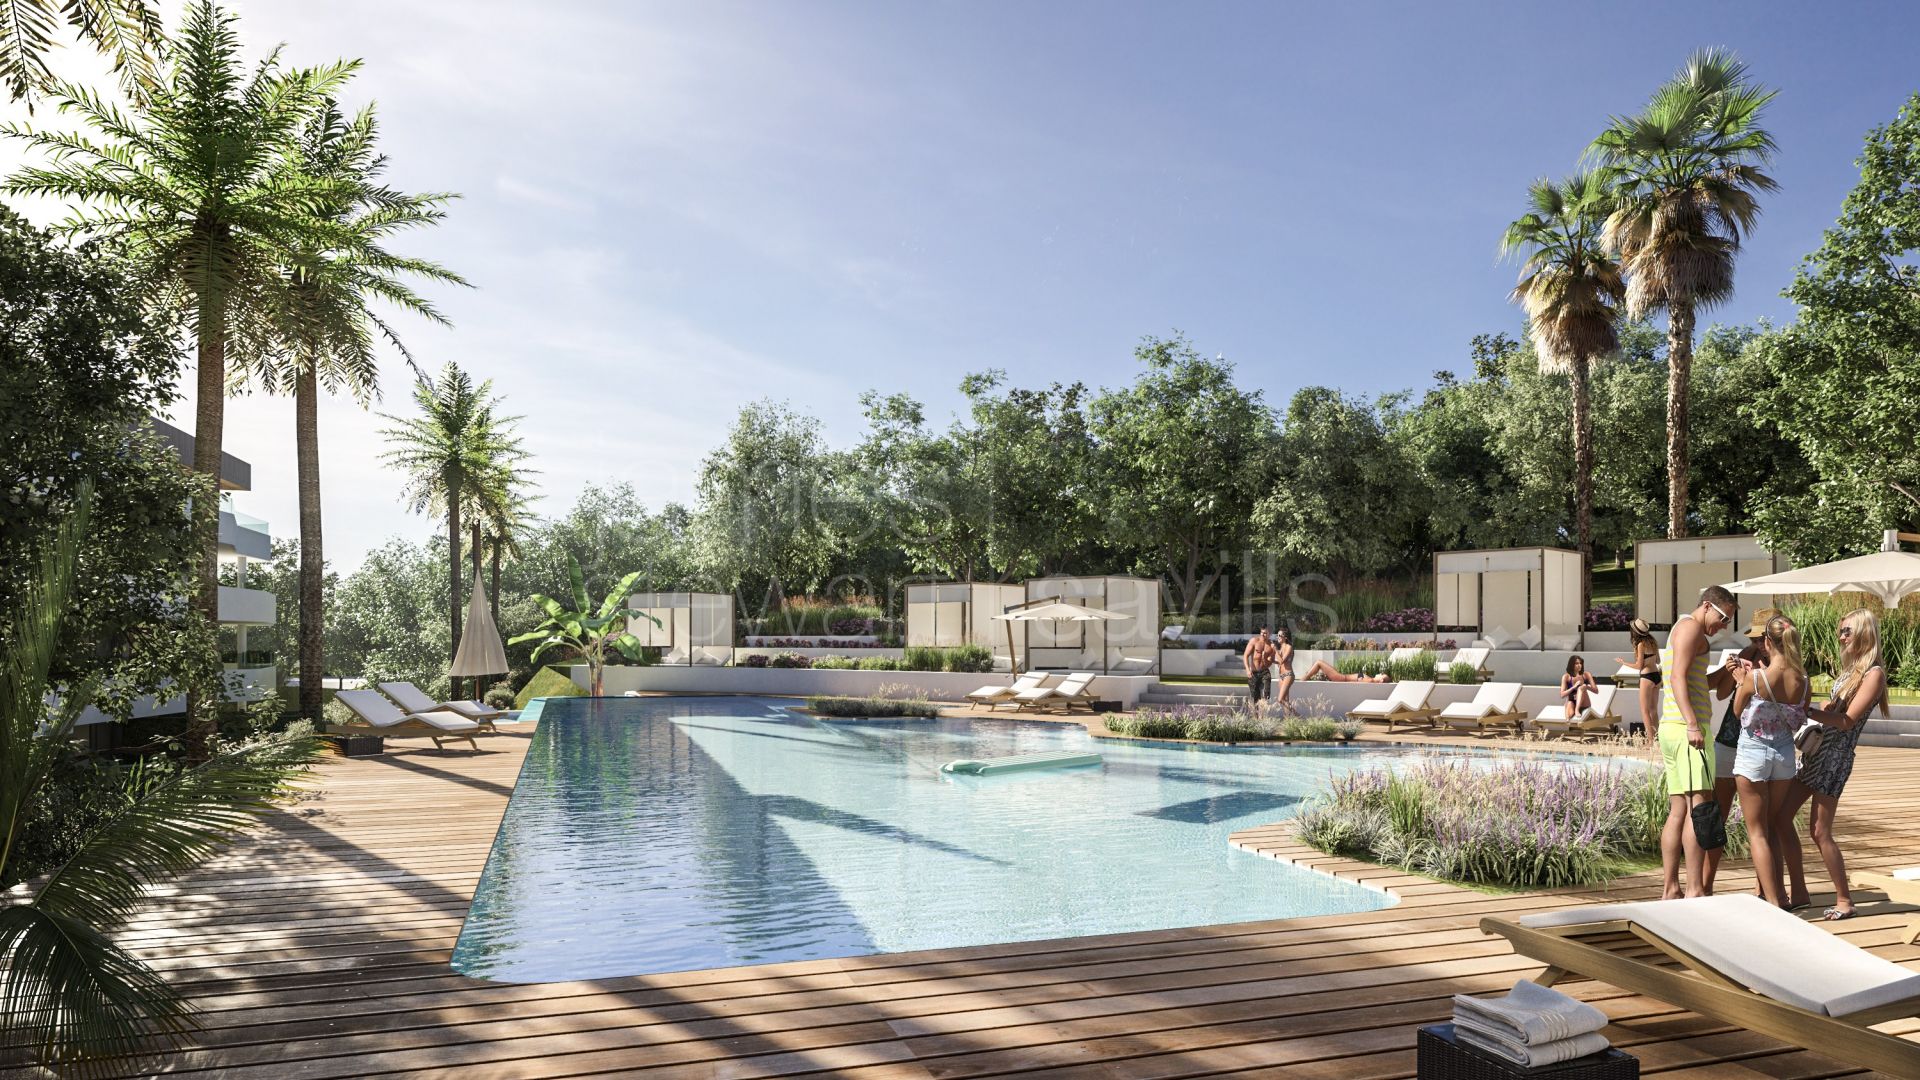 VILLAGE VERDE now for sale - the exciting new residential community in Sotogrande delivery June 2023